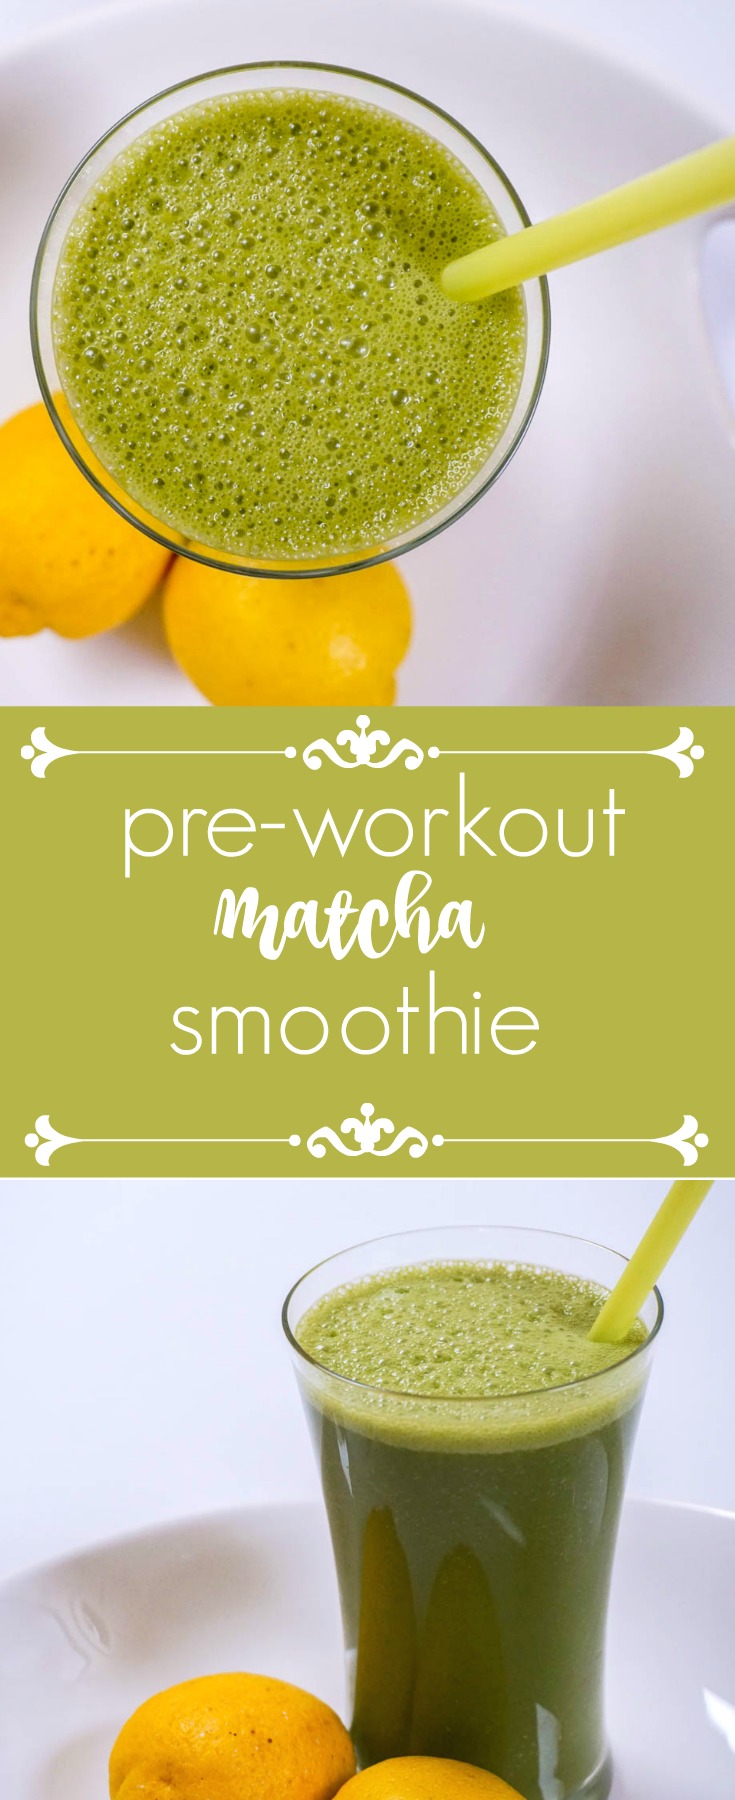 pre workout smoothie